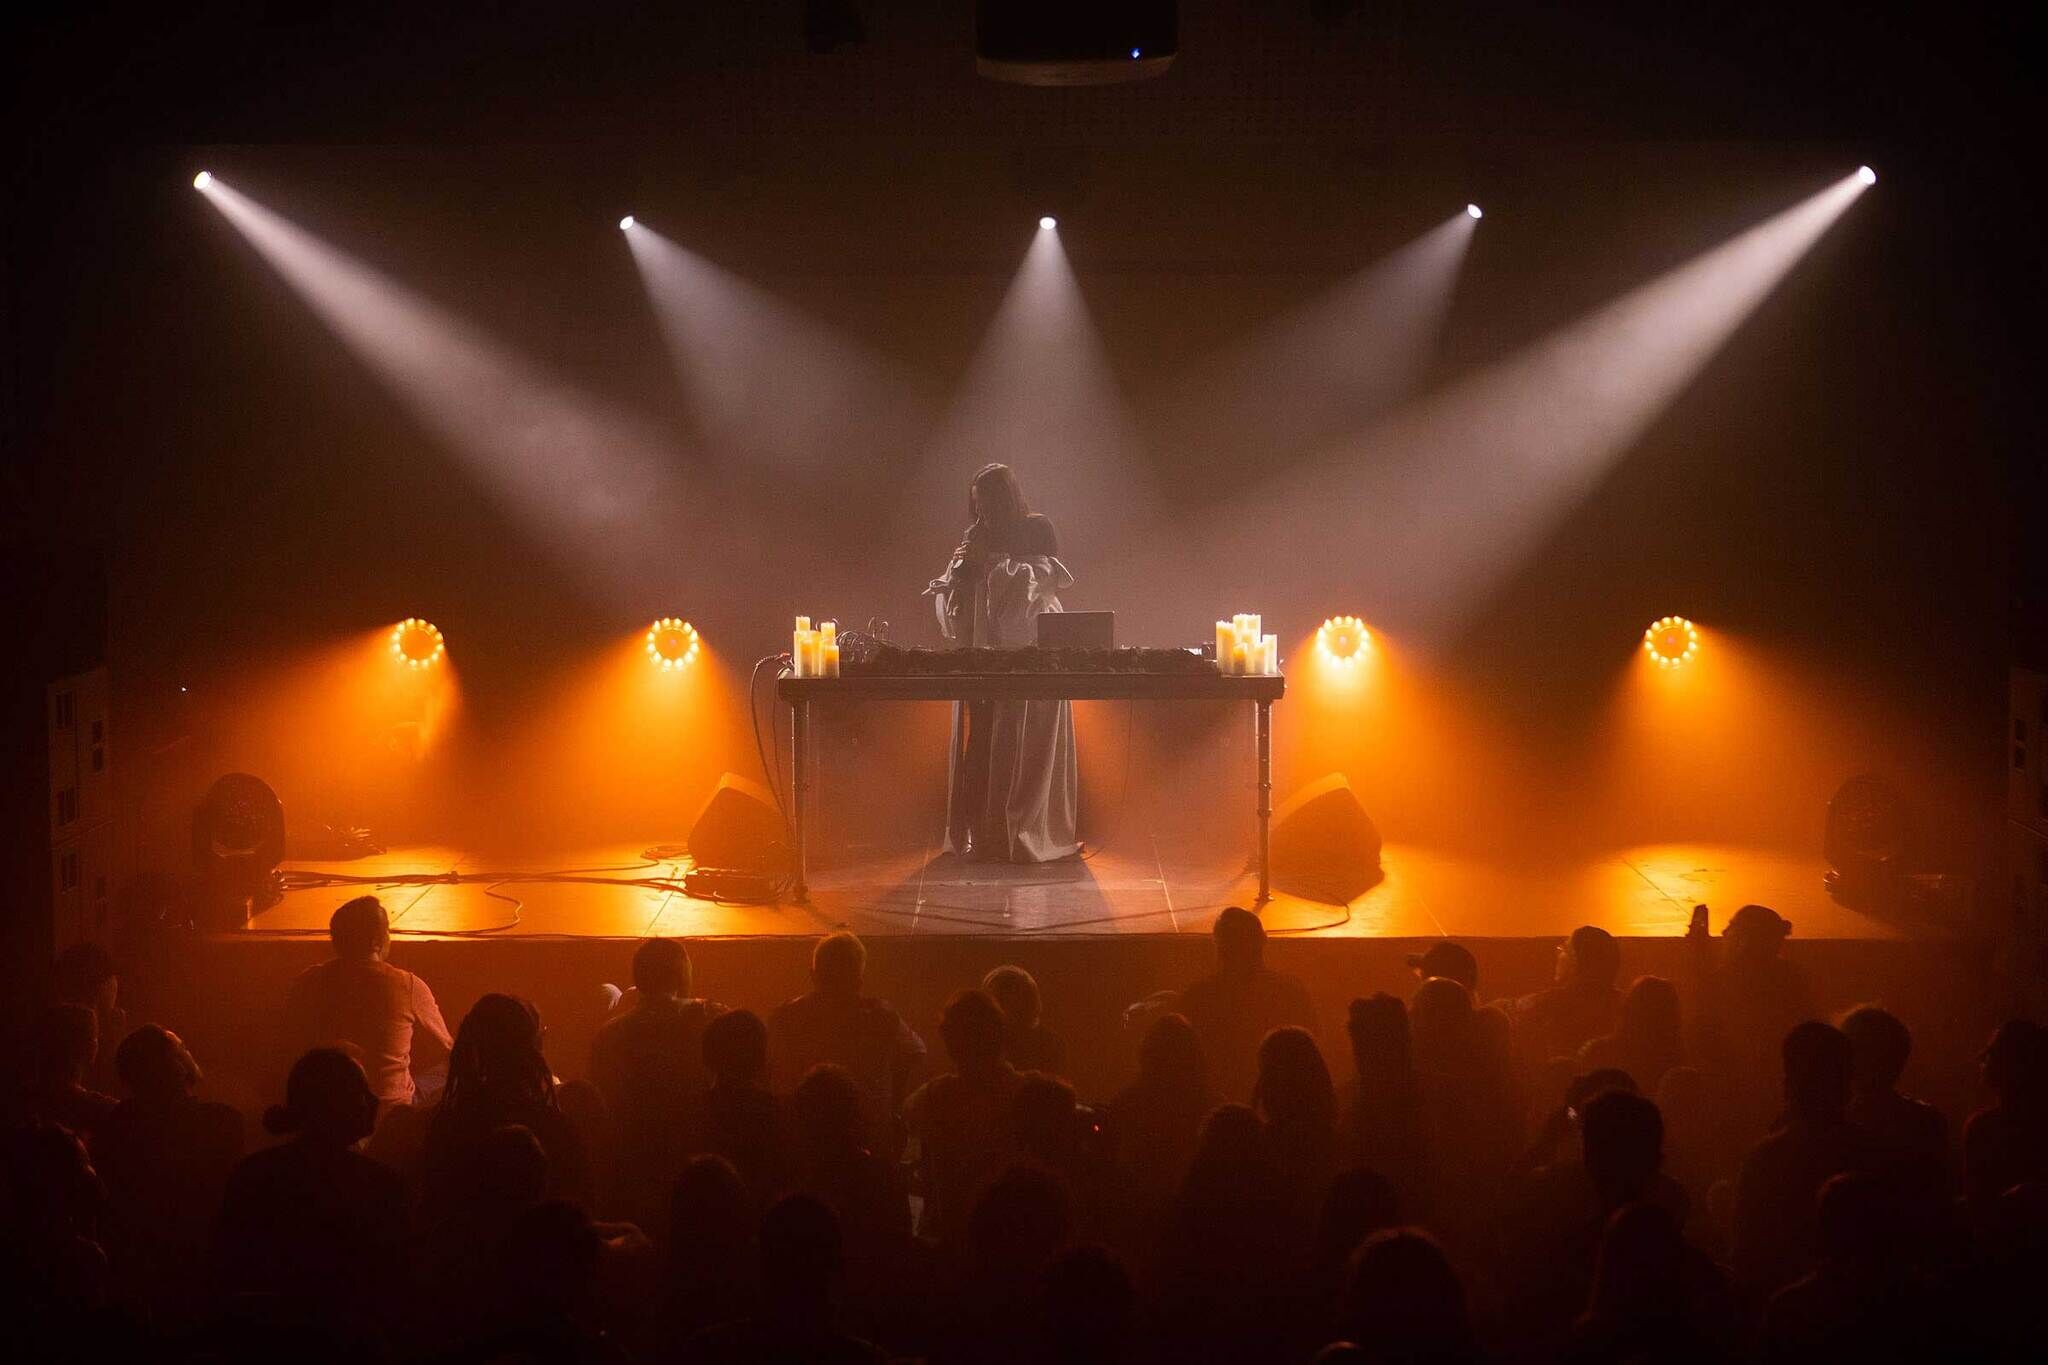 DJ performs on stage with atmospheric lighting as an audience watches.